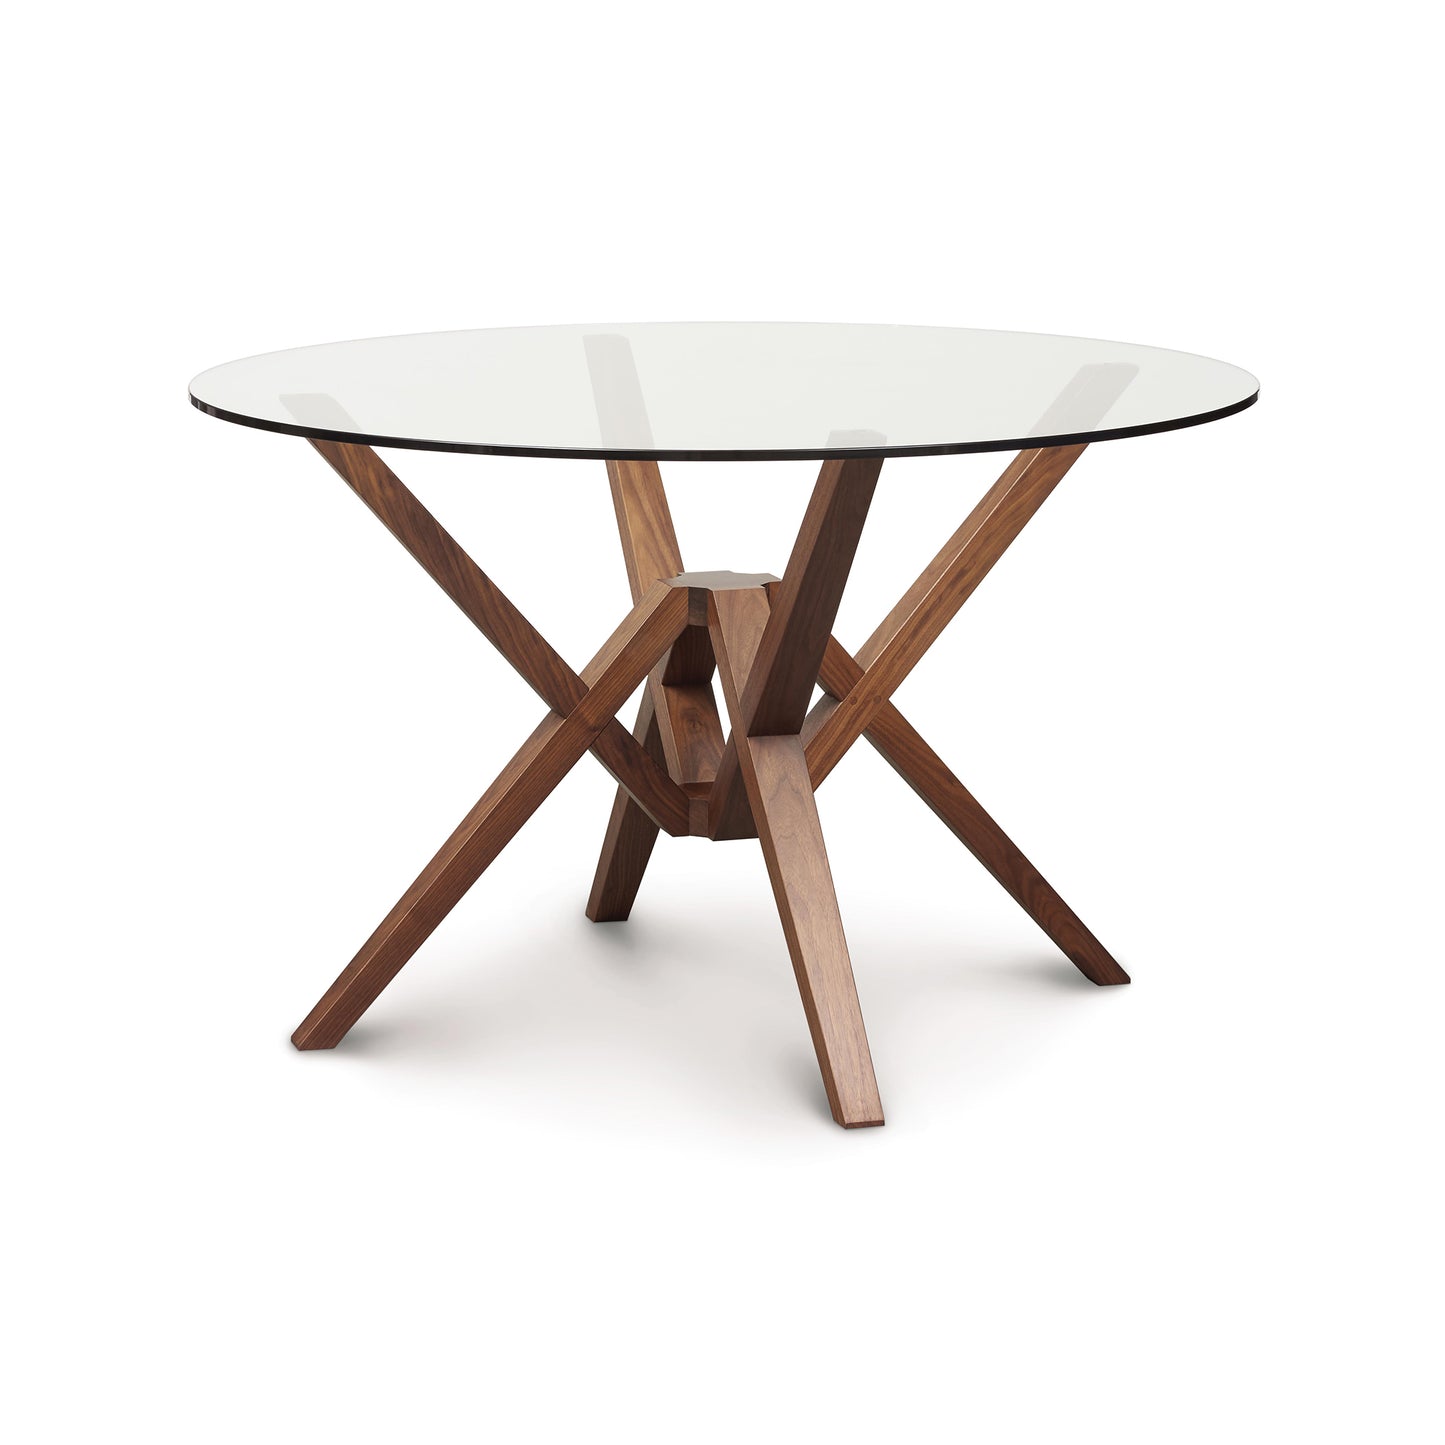 A modern dining table with a glass top and wooden legs.